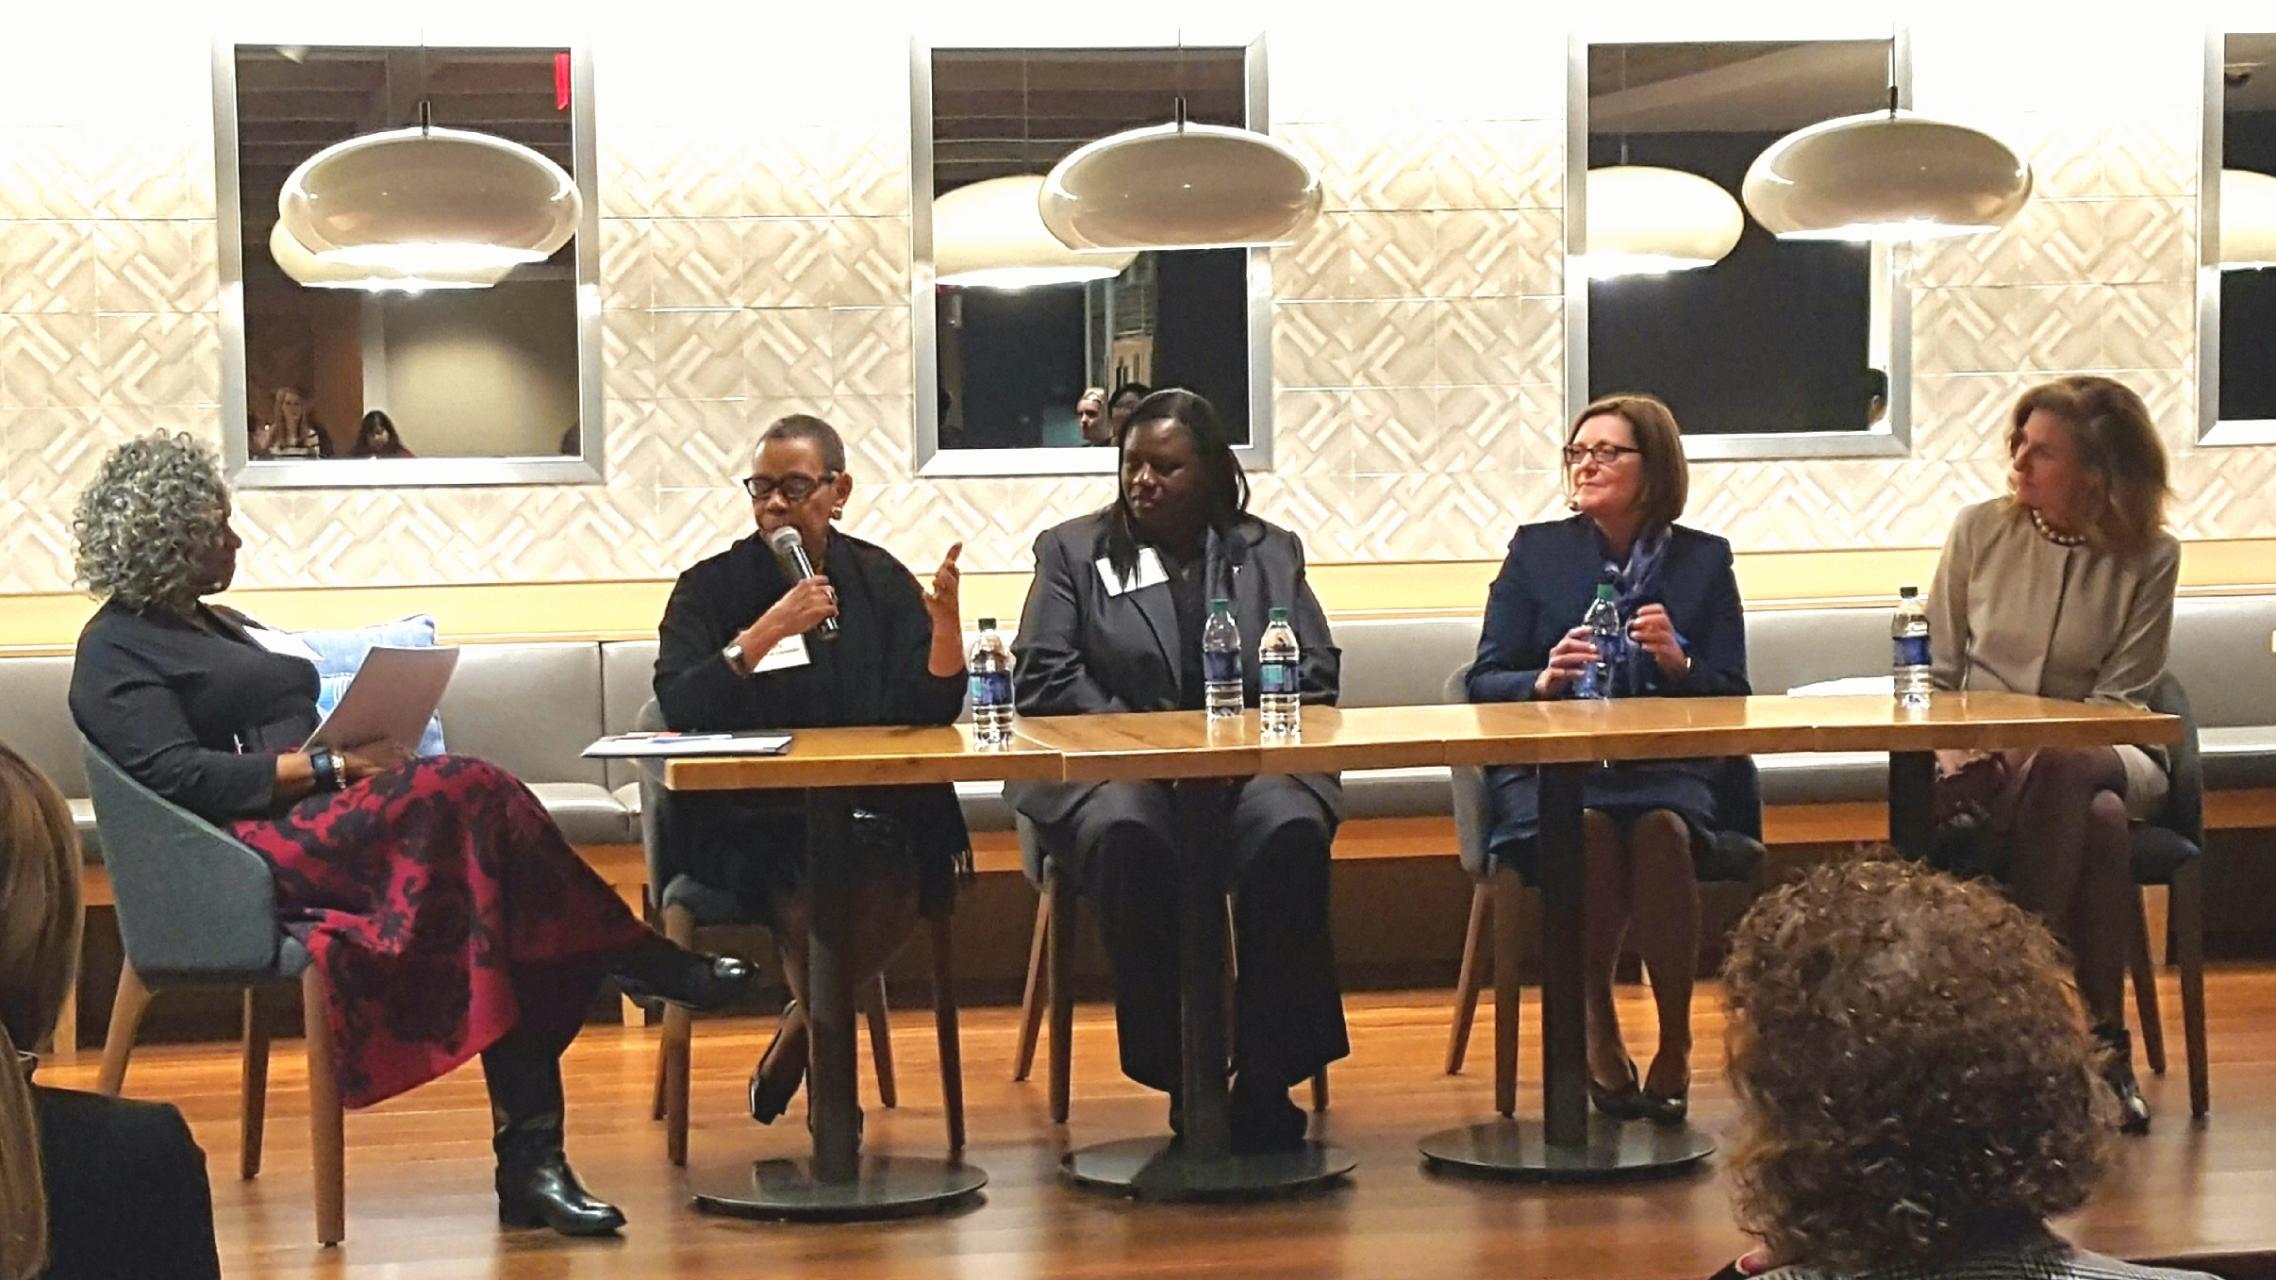 Monica Pearson, Moderator, with College Presidents Mary Schmidt-Campbell, Victoria Seals, Claire Sterk, and Pamela Whitten 